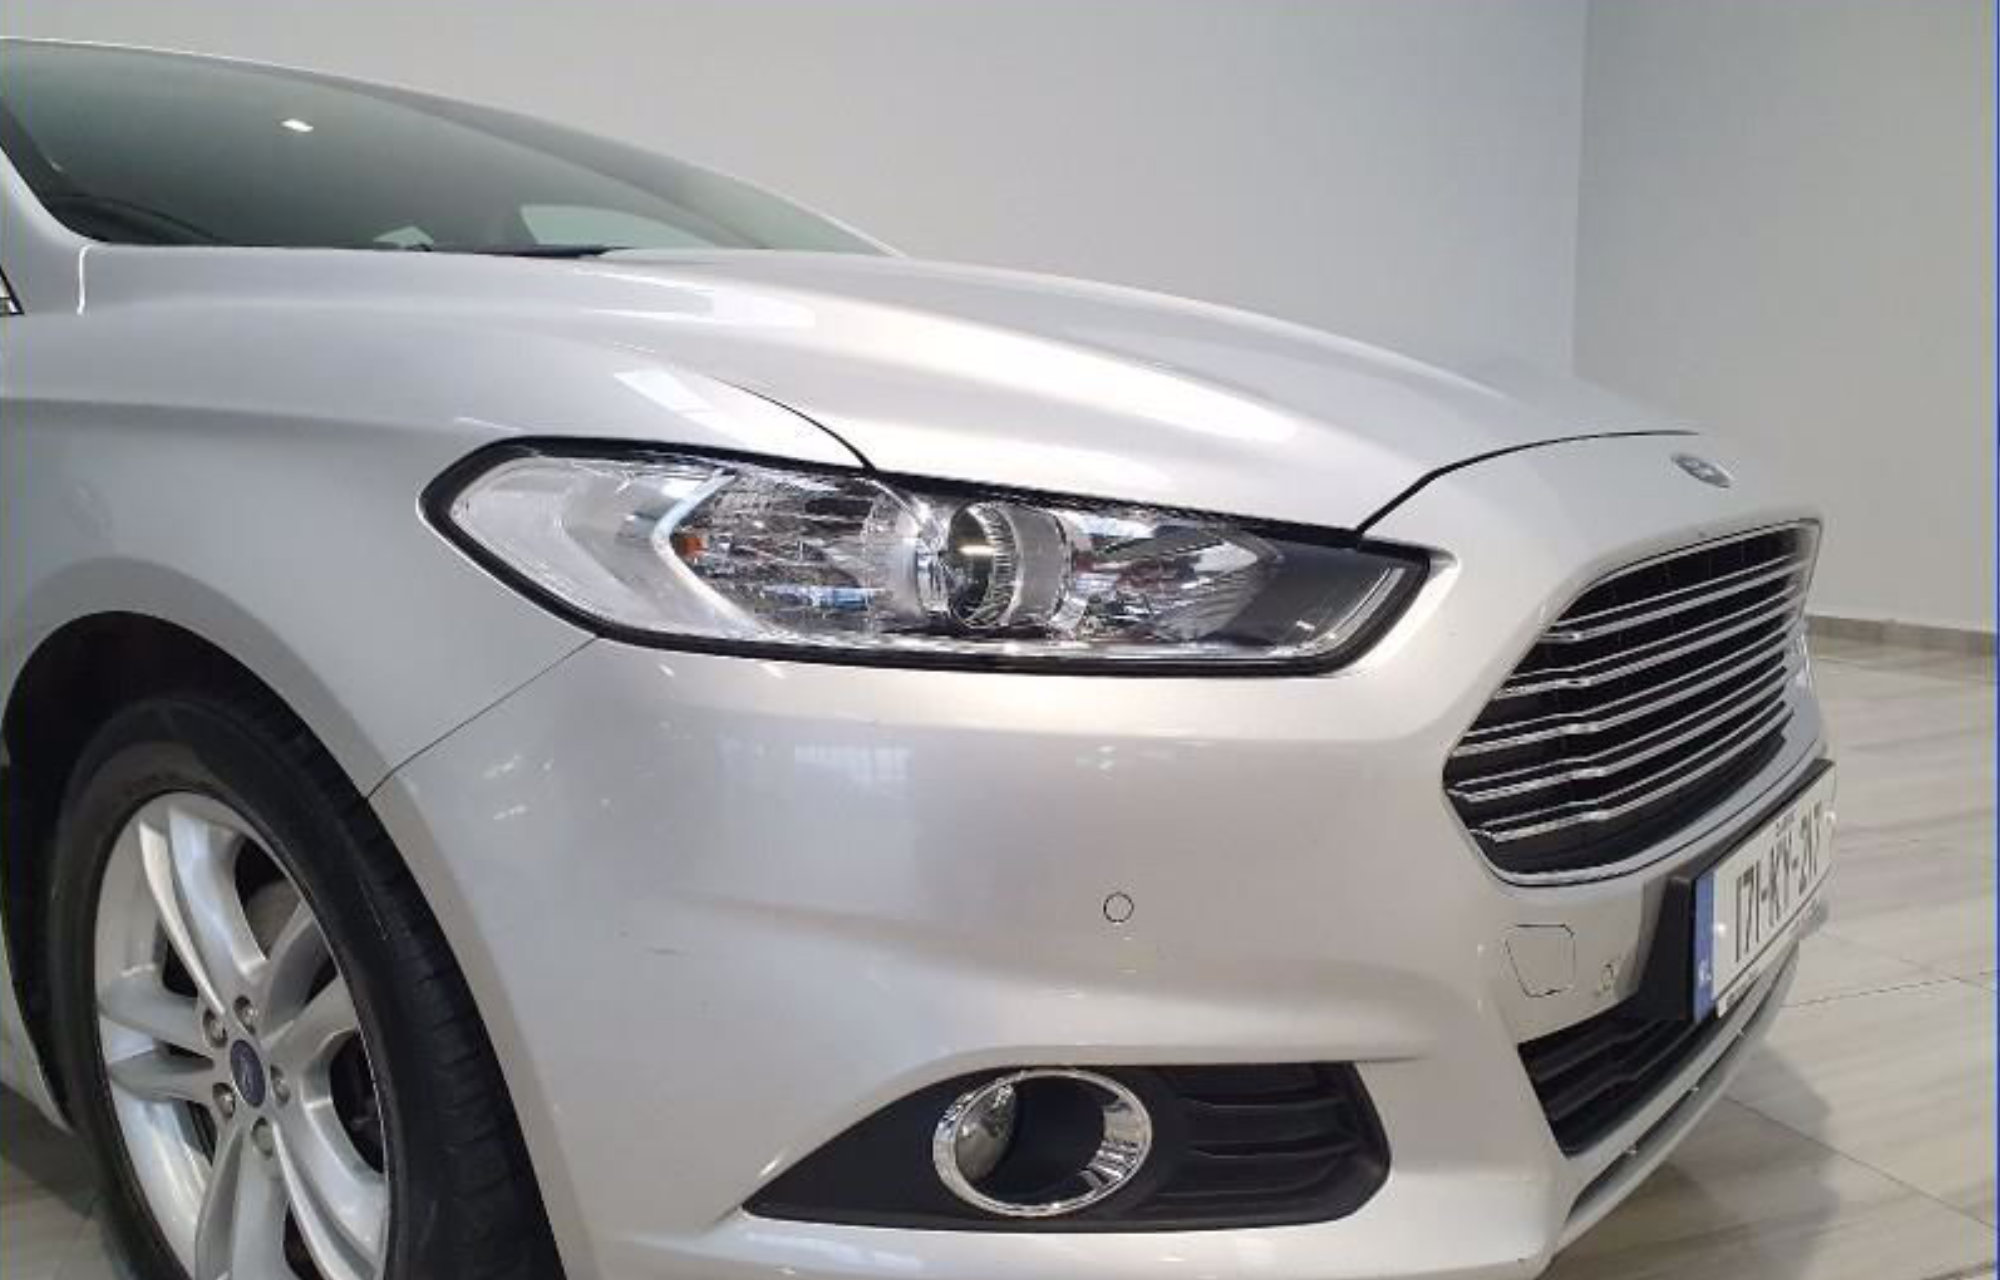 Ford Mondeo headlights